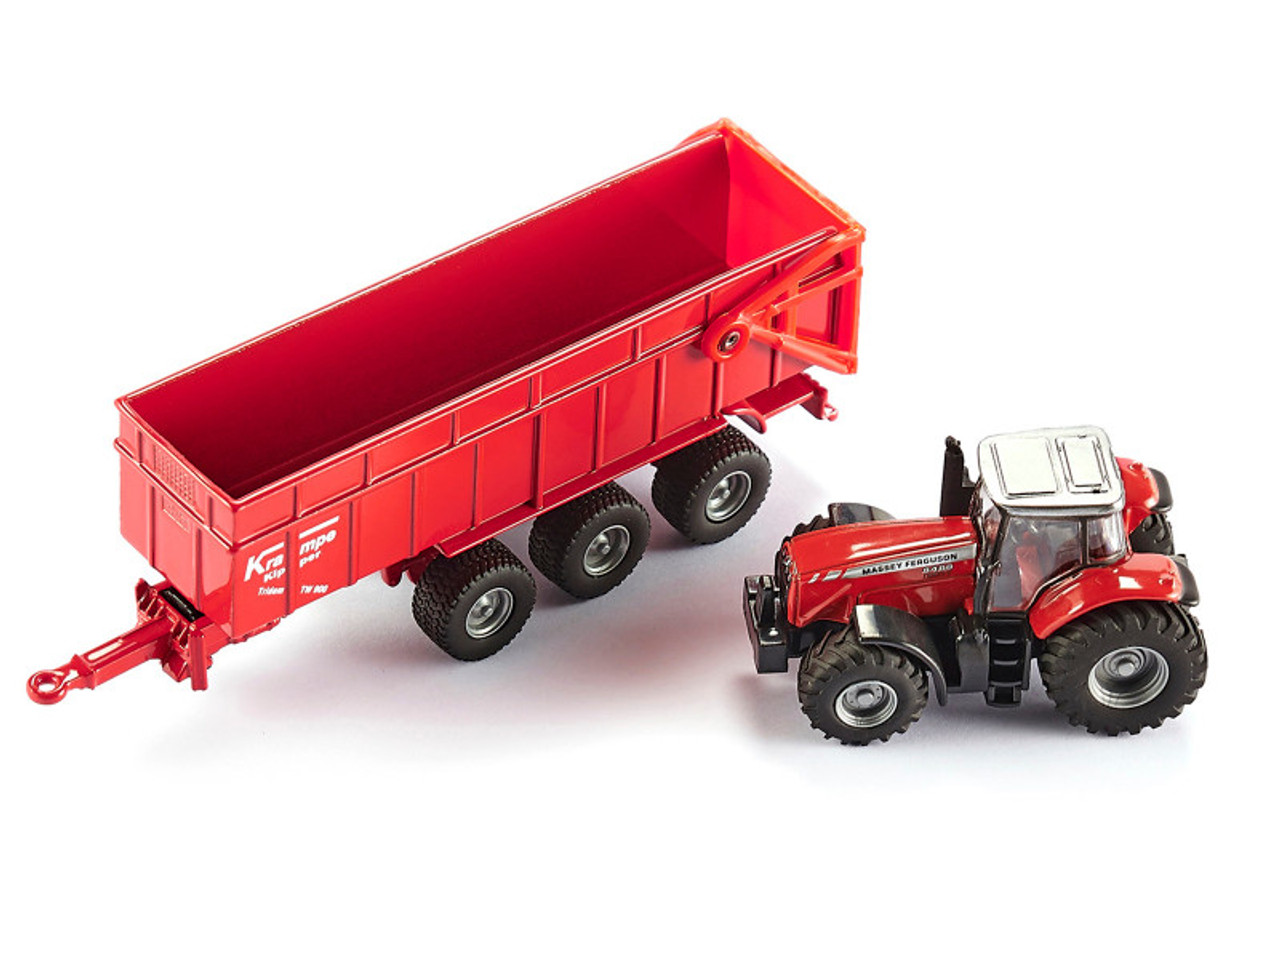 Massey Ferguson 8480 Dyna VT Tractor Red with Silver Top and Krampe Dump Trailer Red 1/87 (HO) Diecast Models by Siku